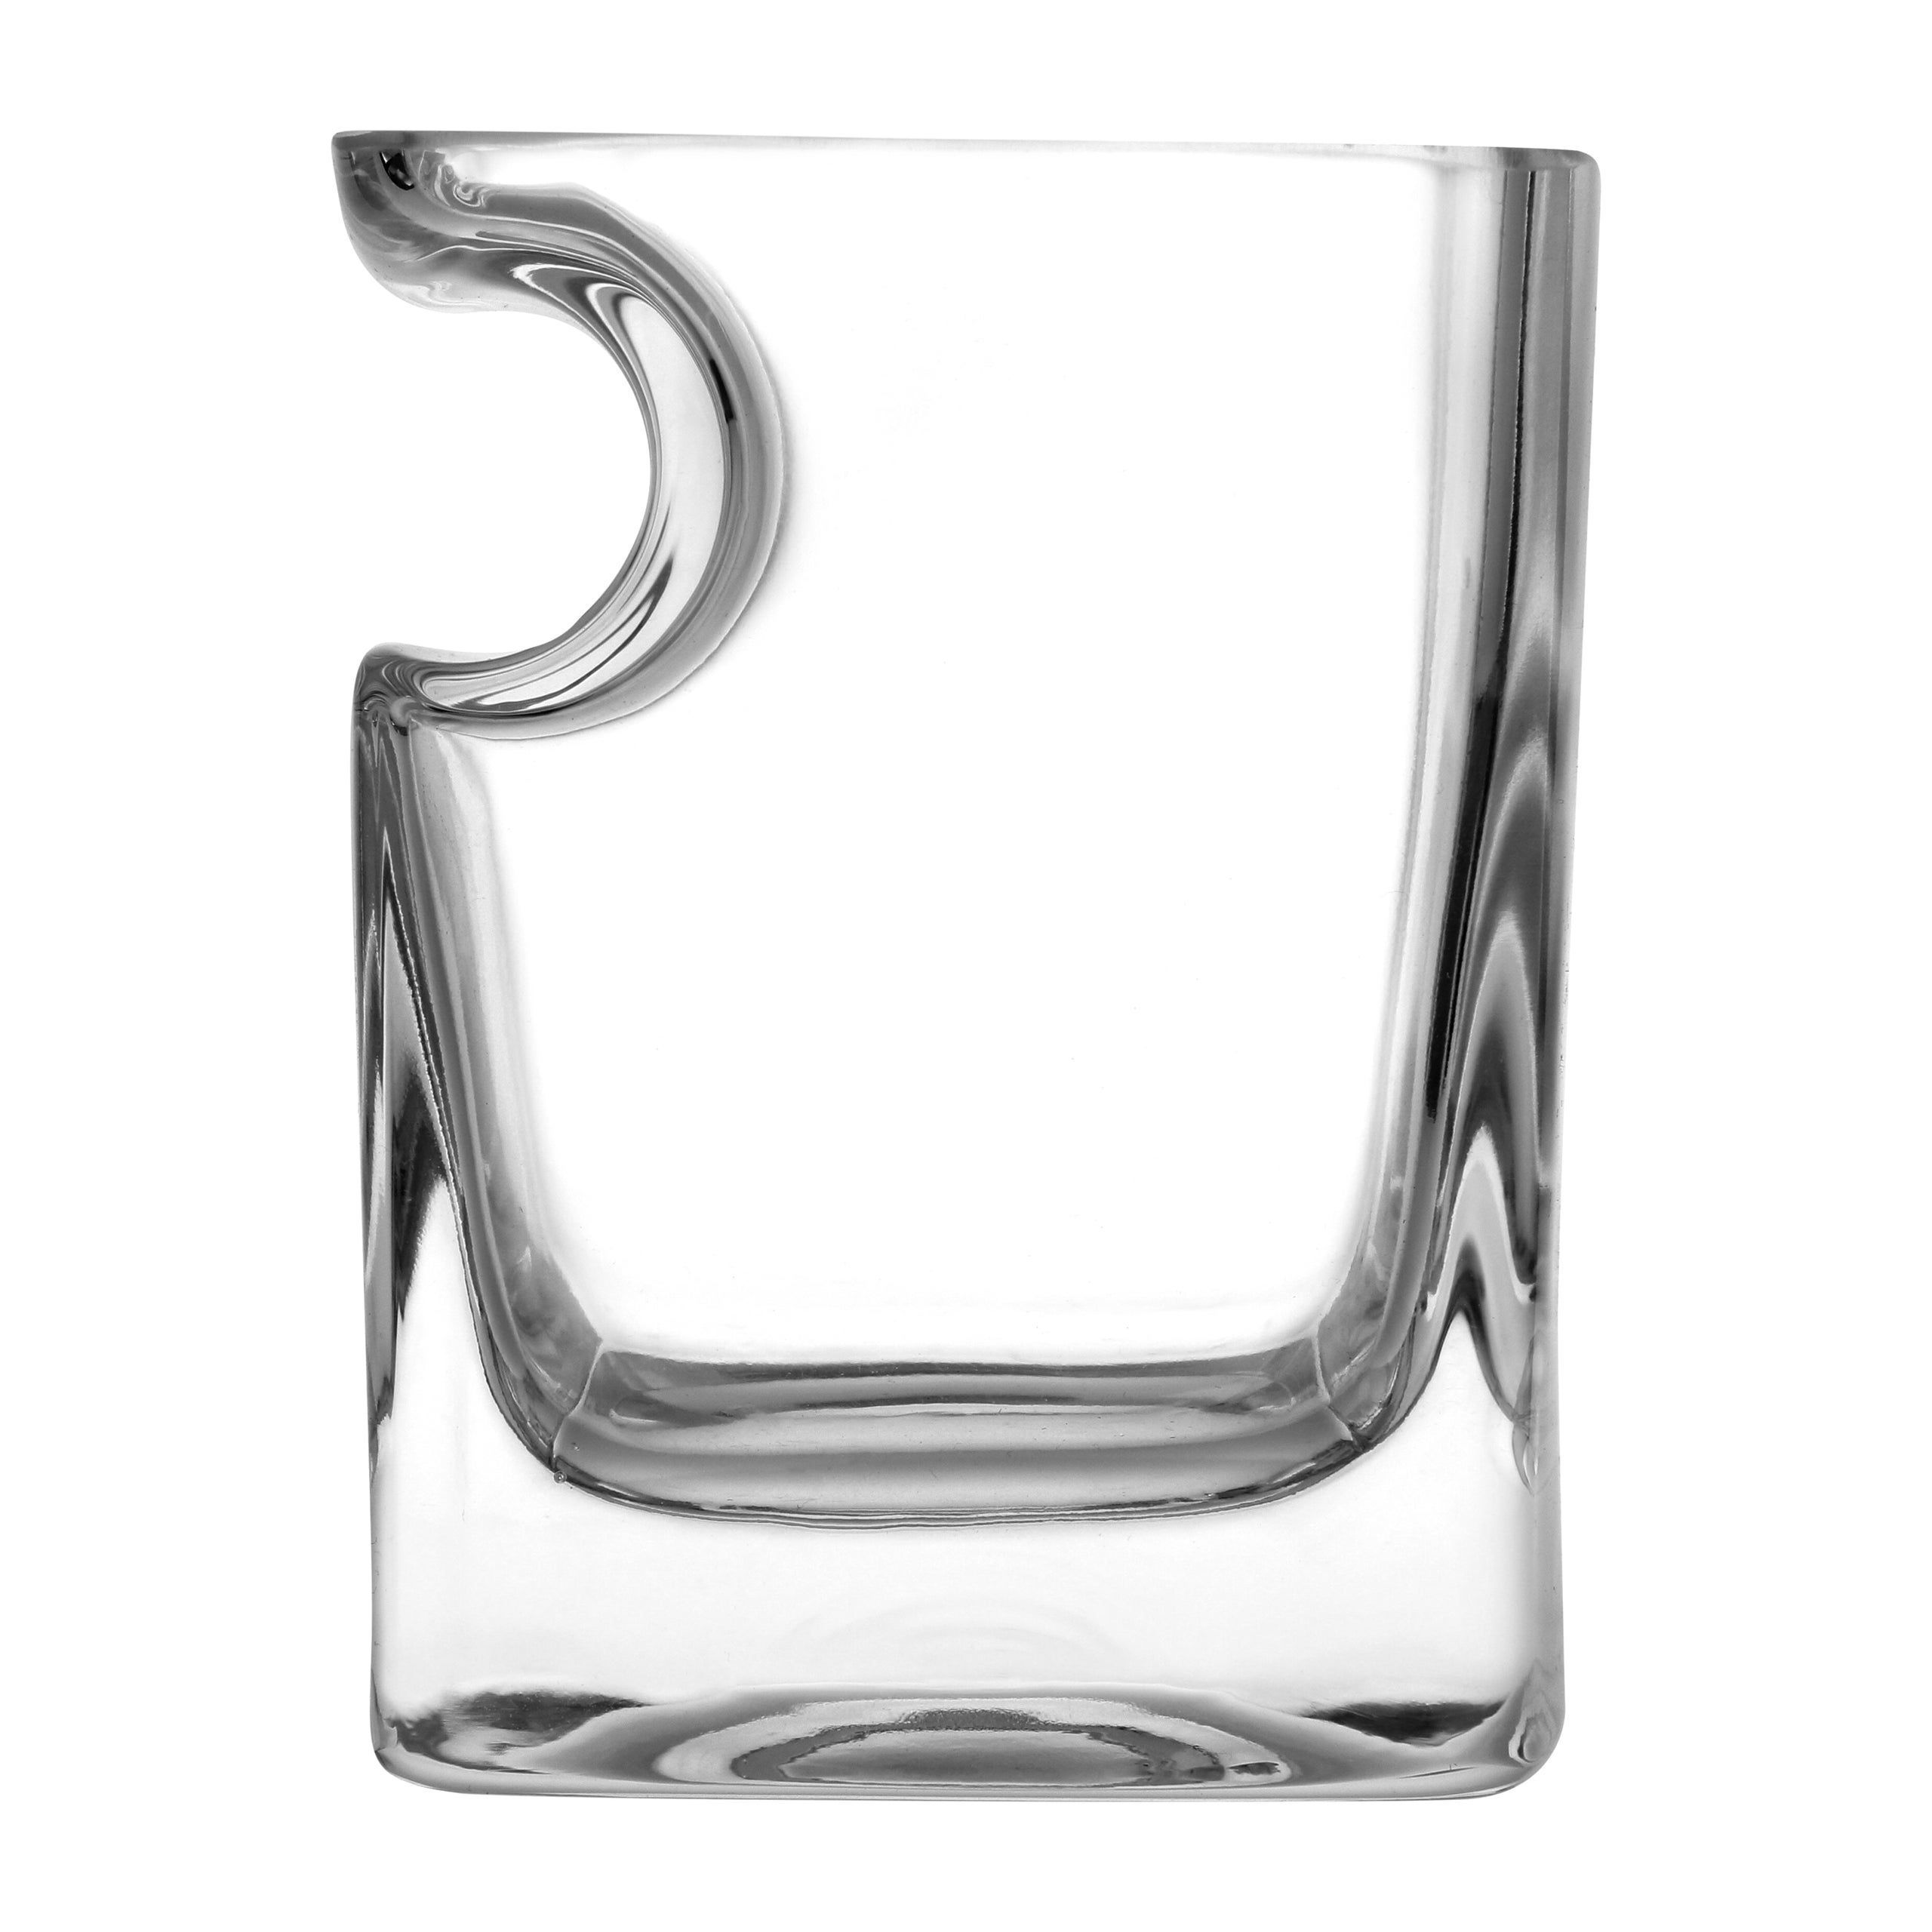 Corkcicle Cigar Whiskey Glass